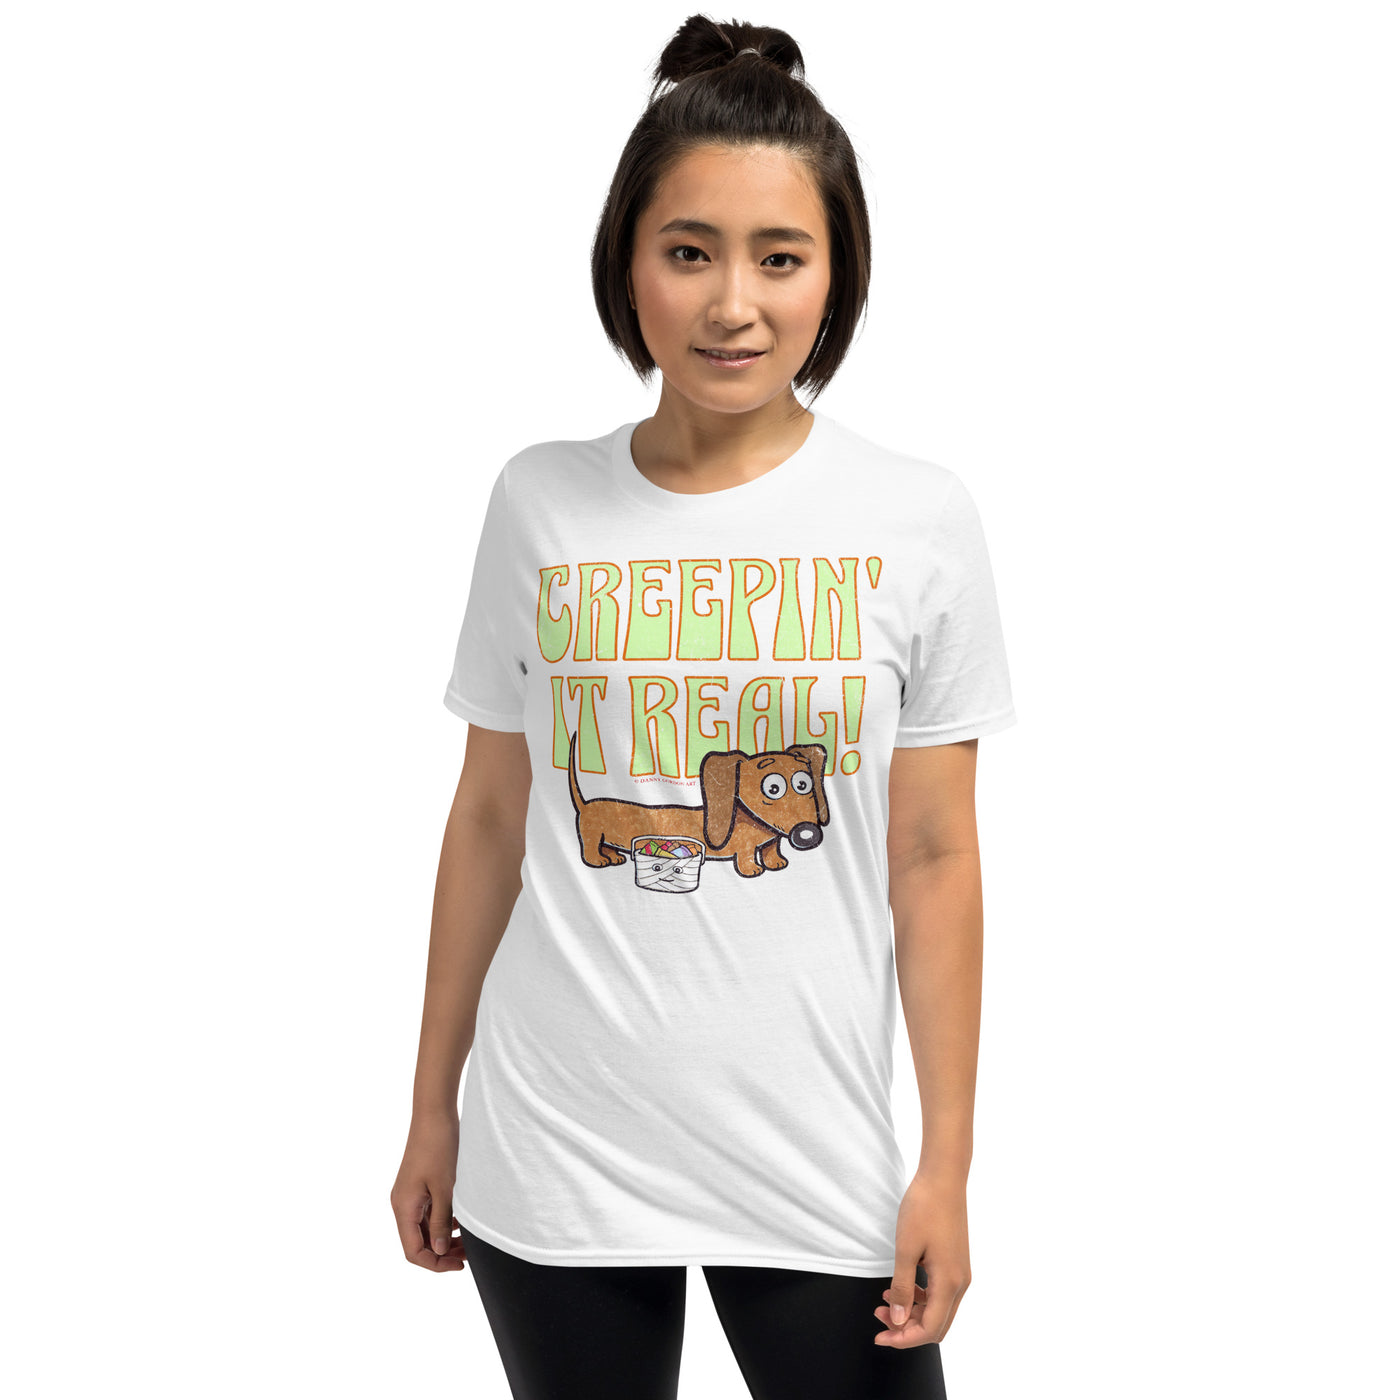 Funny and  Cute Doxie Dachshund Dog on an adorable Halloween Unisex Tee t shirt